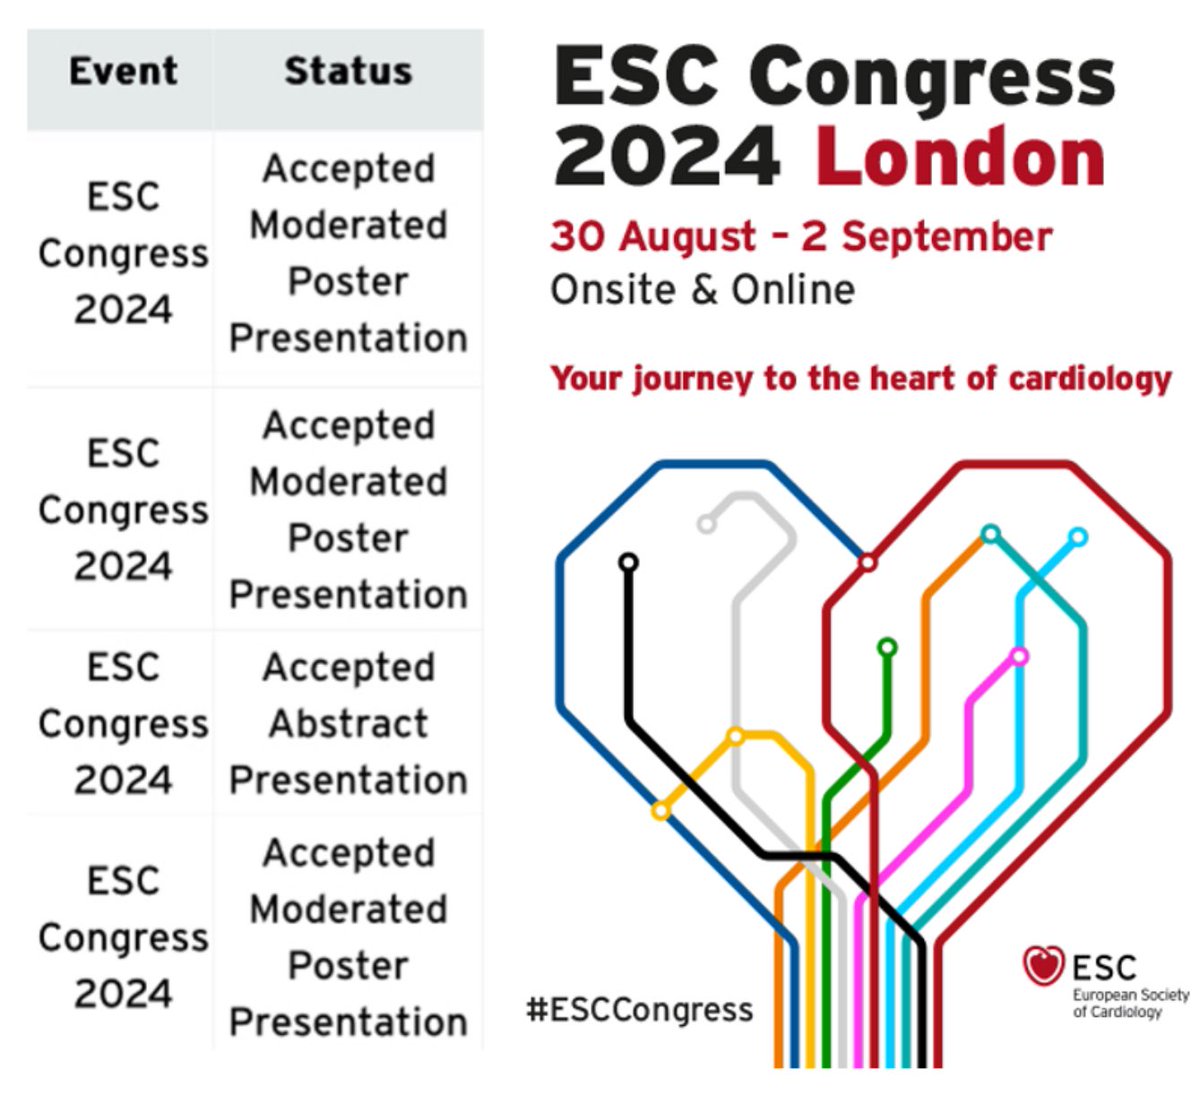 Our abstracts have been accepted for #ESCCongress - I can't wait to present them! @JHMontfort10 @alexariasmx20 @drdargaray @rodrigogopar @DanielSierraLM ⚡️🫀⚡️